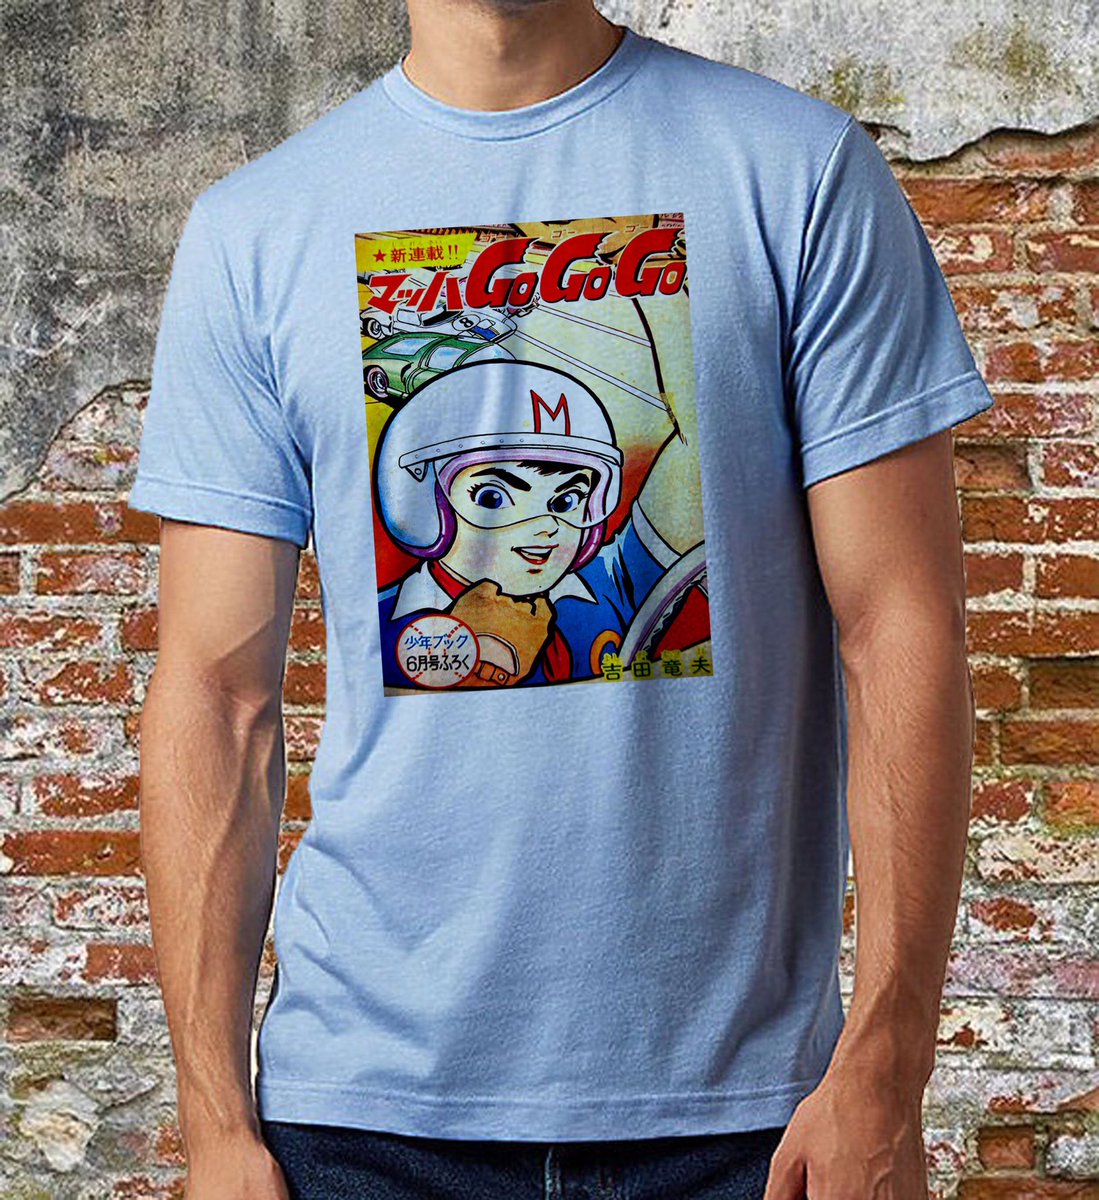 GoGoGo #SpeedRacer! Find this ONE OF A KIND Japanese inspired vintage tee TODAY at 📍North Hollywood Metro Station in EatLA Fest! You can also order through our #etsy shop, here’s the link! ||  #clothing #shirt #handmade #vintage #retro #triblendtshirt etsy.me/2BK5yYX